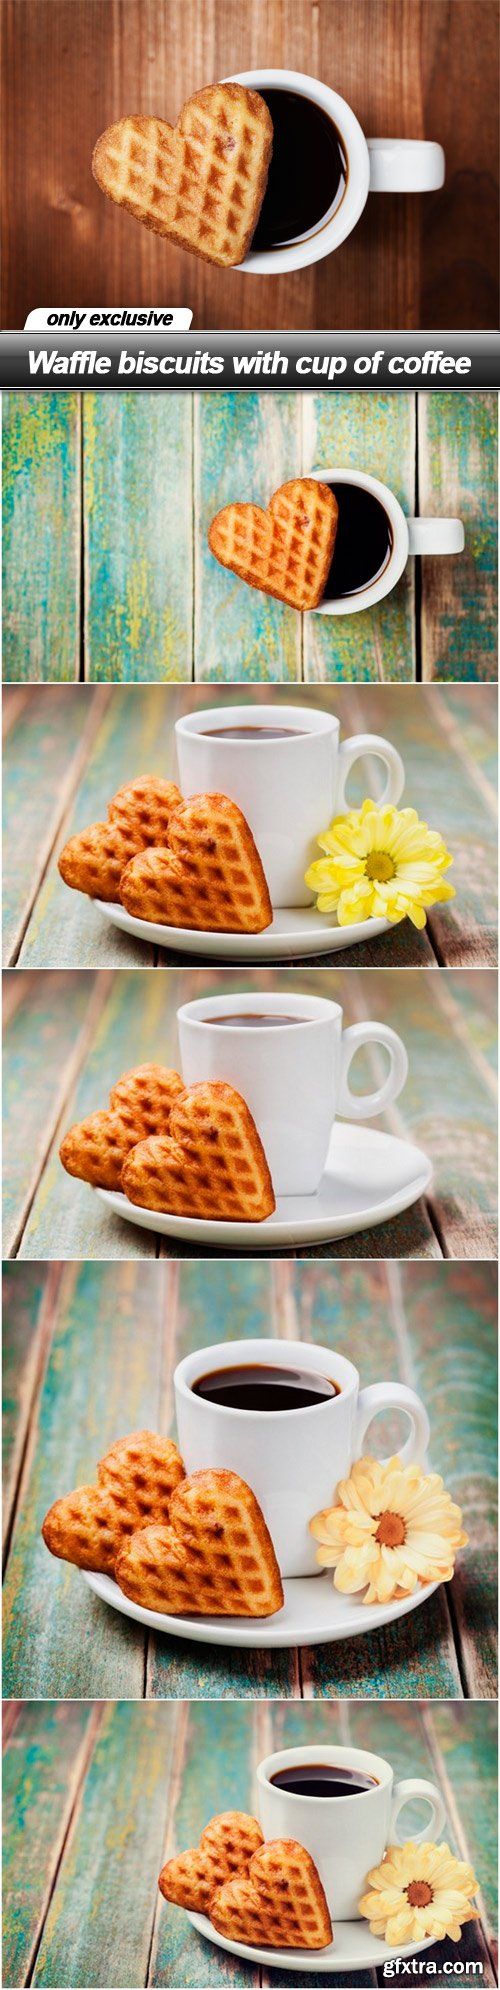 Waffle biscuits with cup of coffee - 6 UHQ JPEG